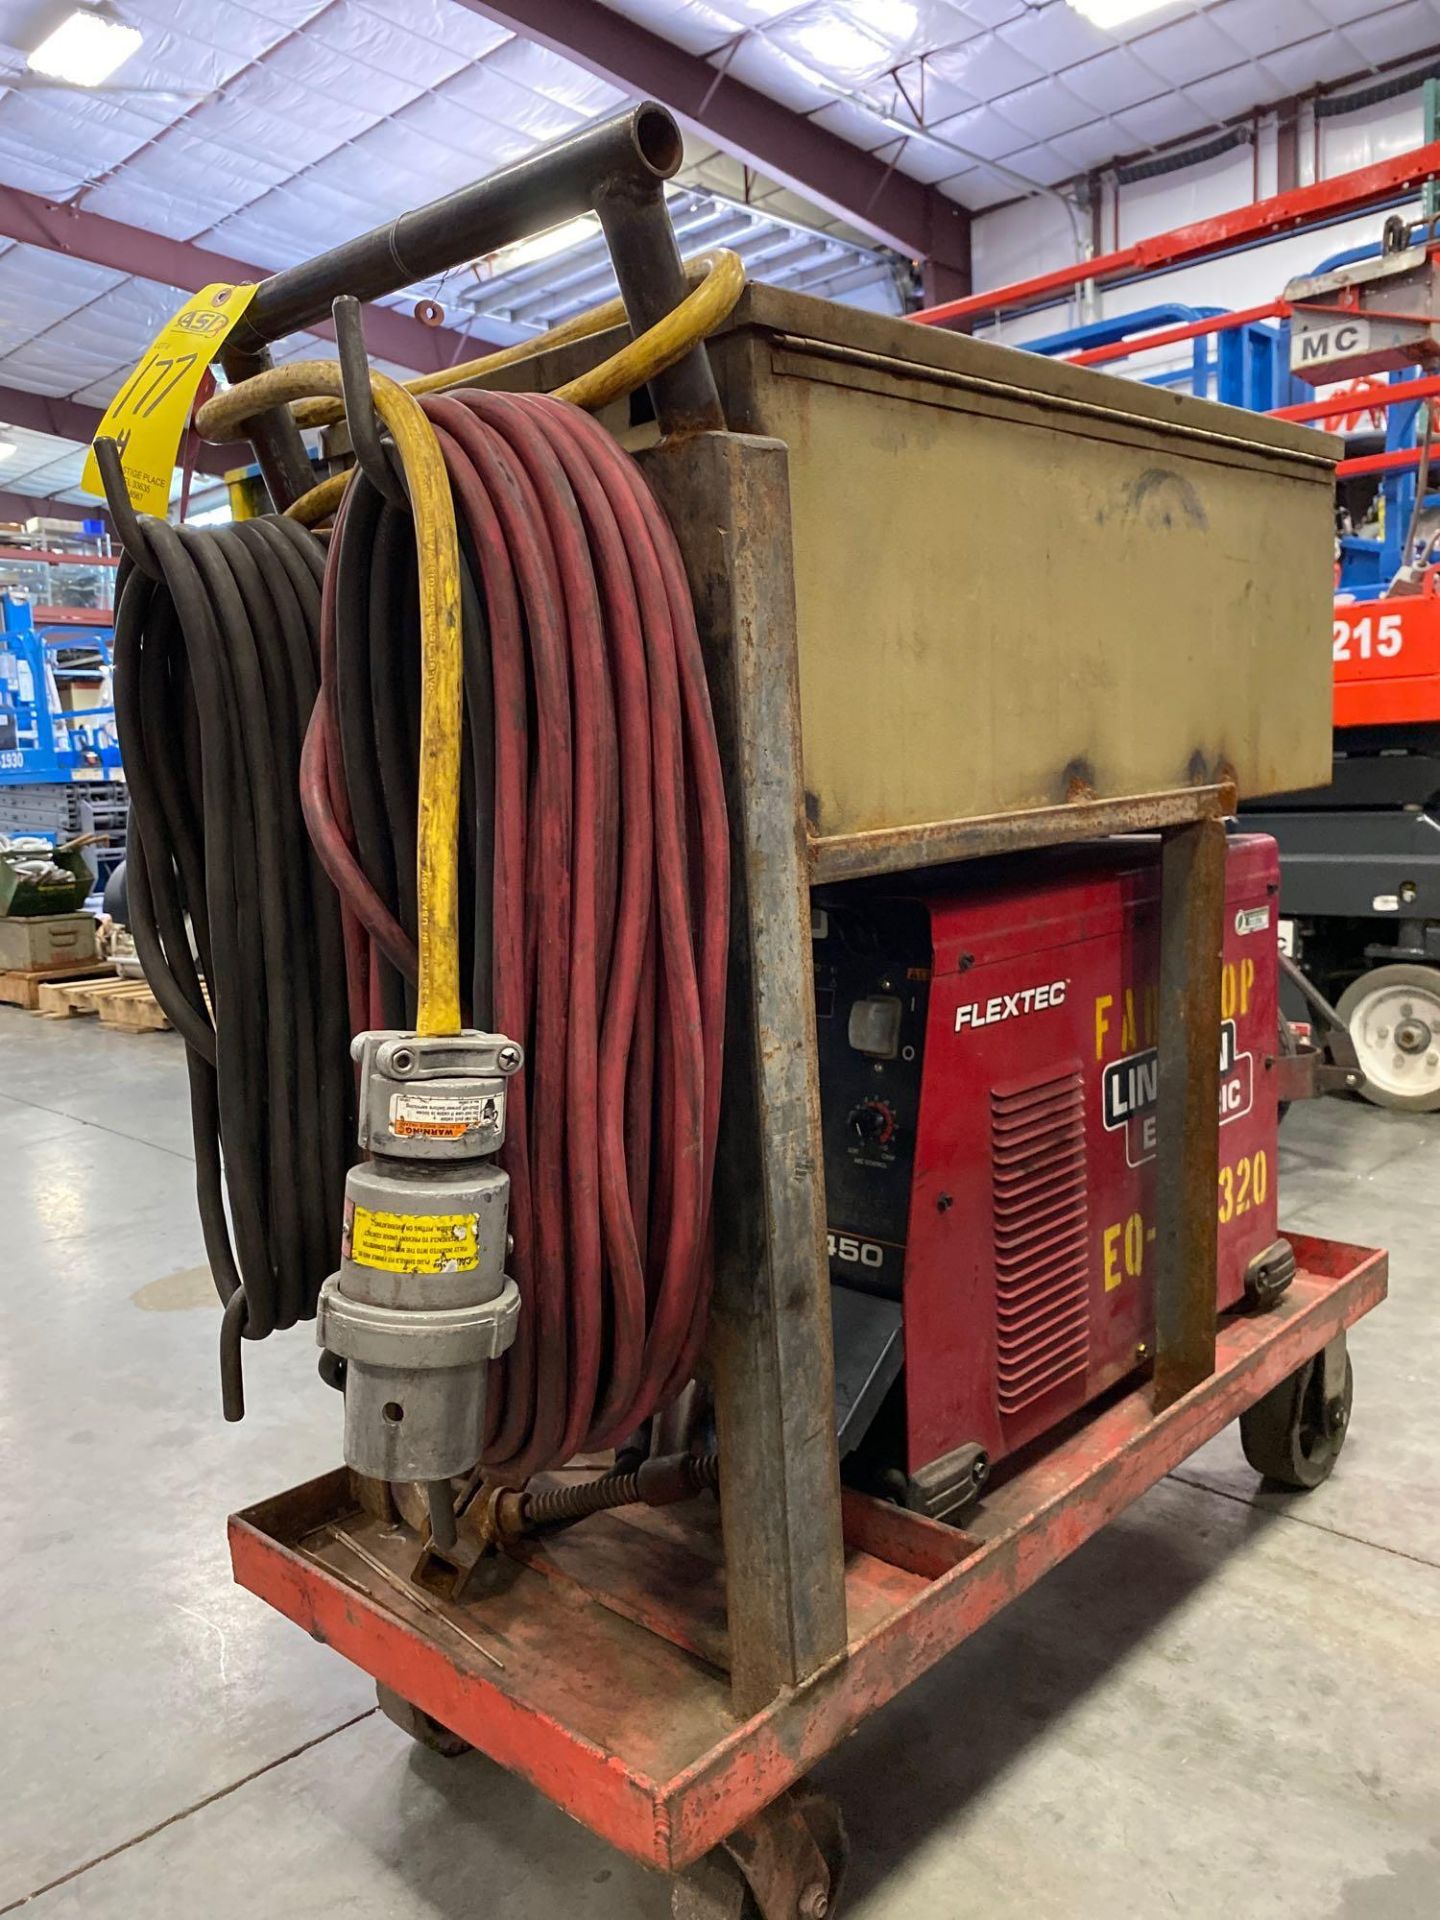 LINCOLN ELECTRIC FLEXTEC 450 WELDER WITH CART AND STORAGE BOX